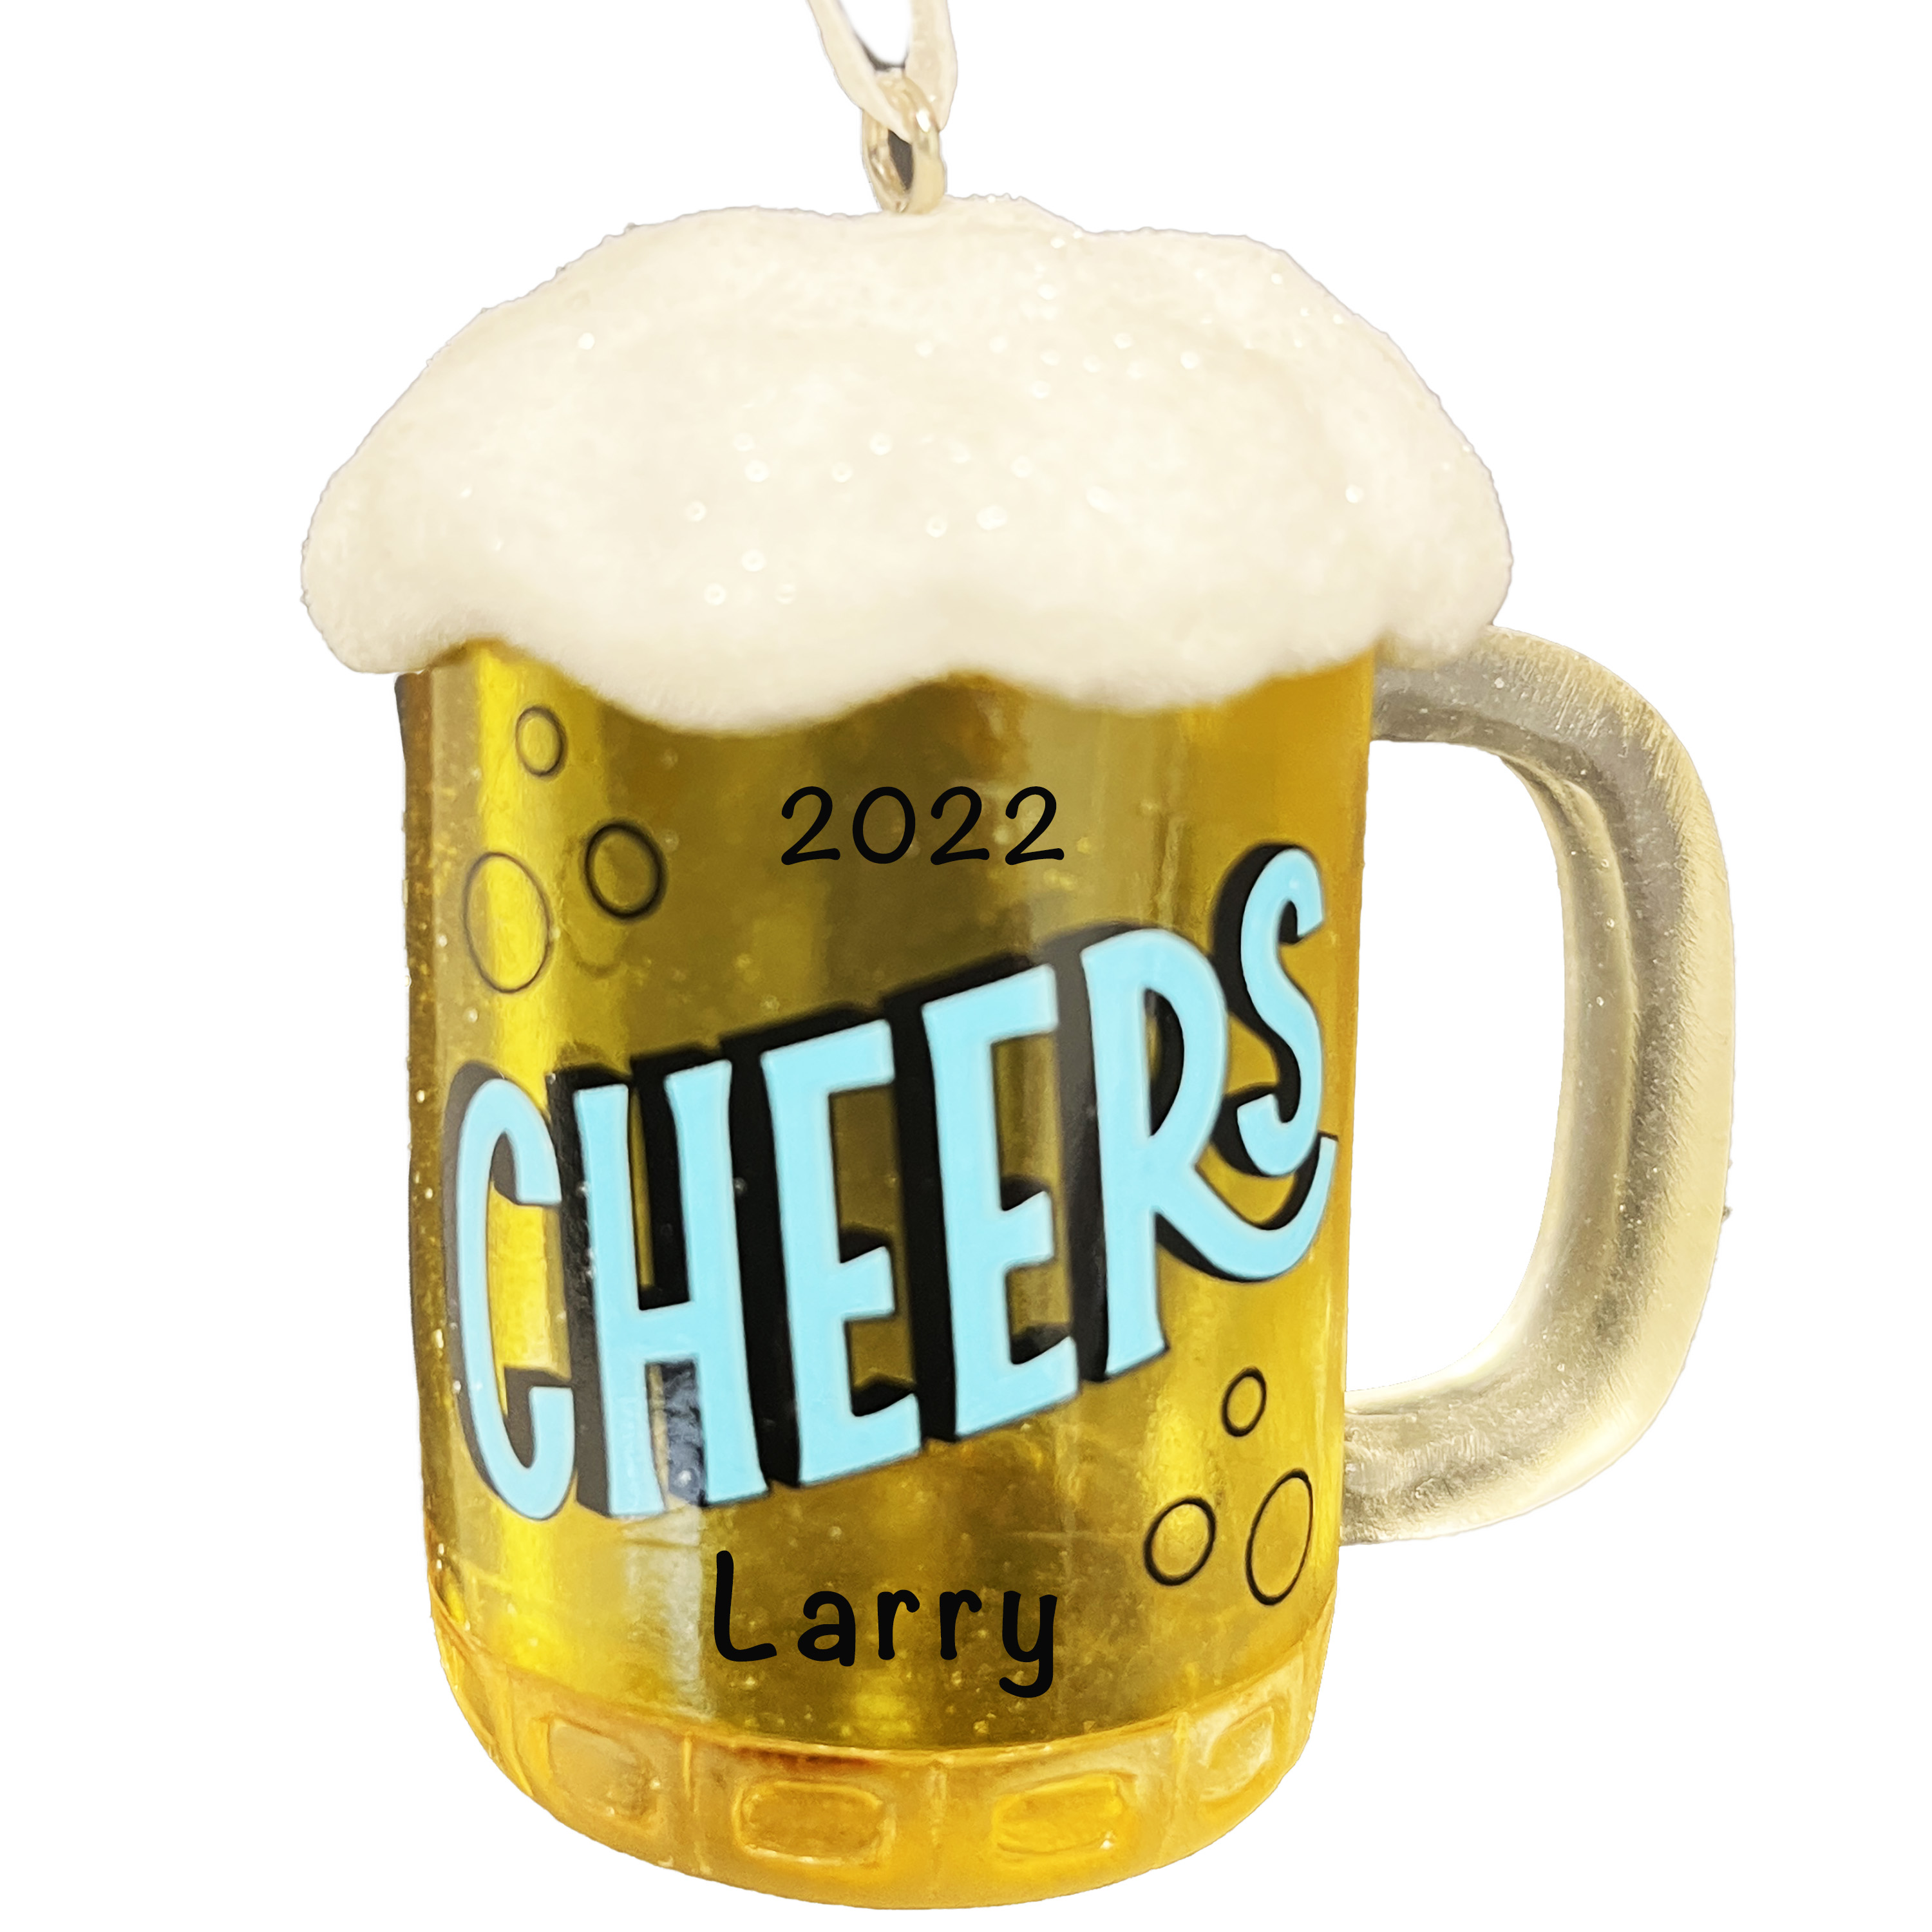 Beer Ornament - Personalized Beer Christmas Ornament